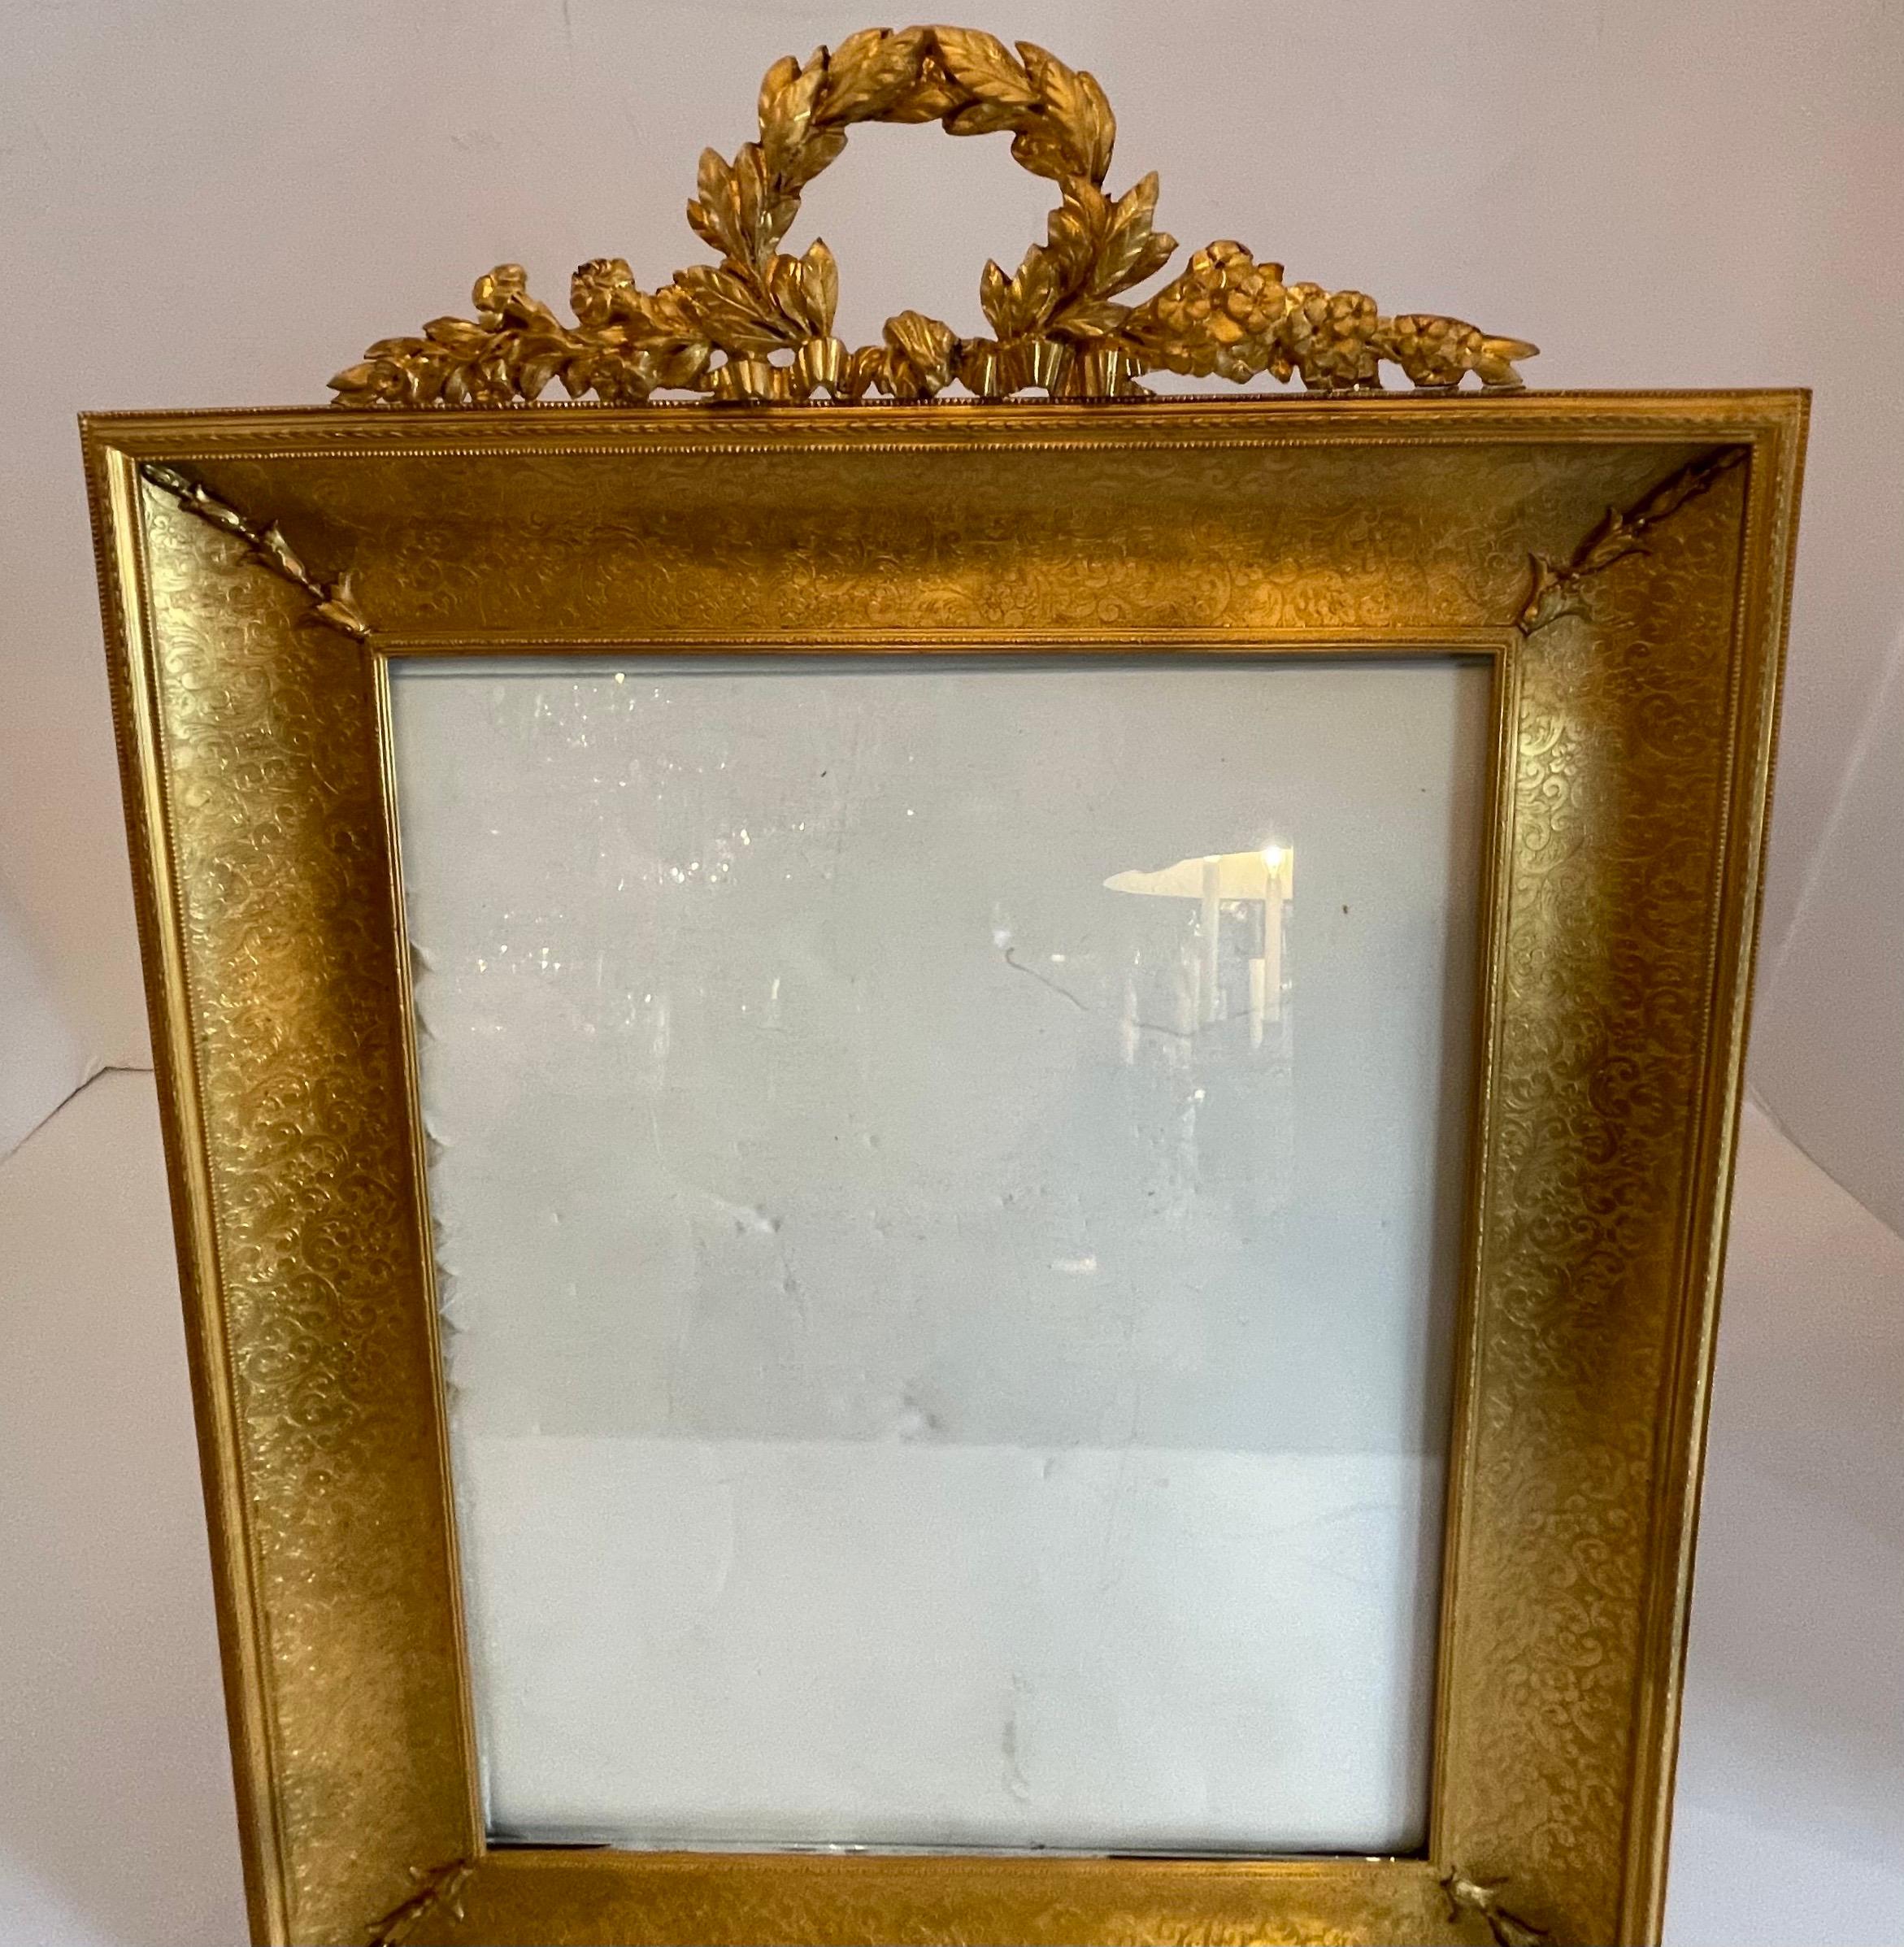 A wonderful large French Louis XVI style, dore bronze picture frame with bow wreath garland crown.